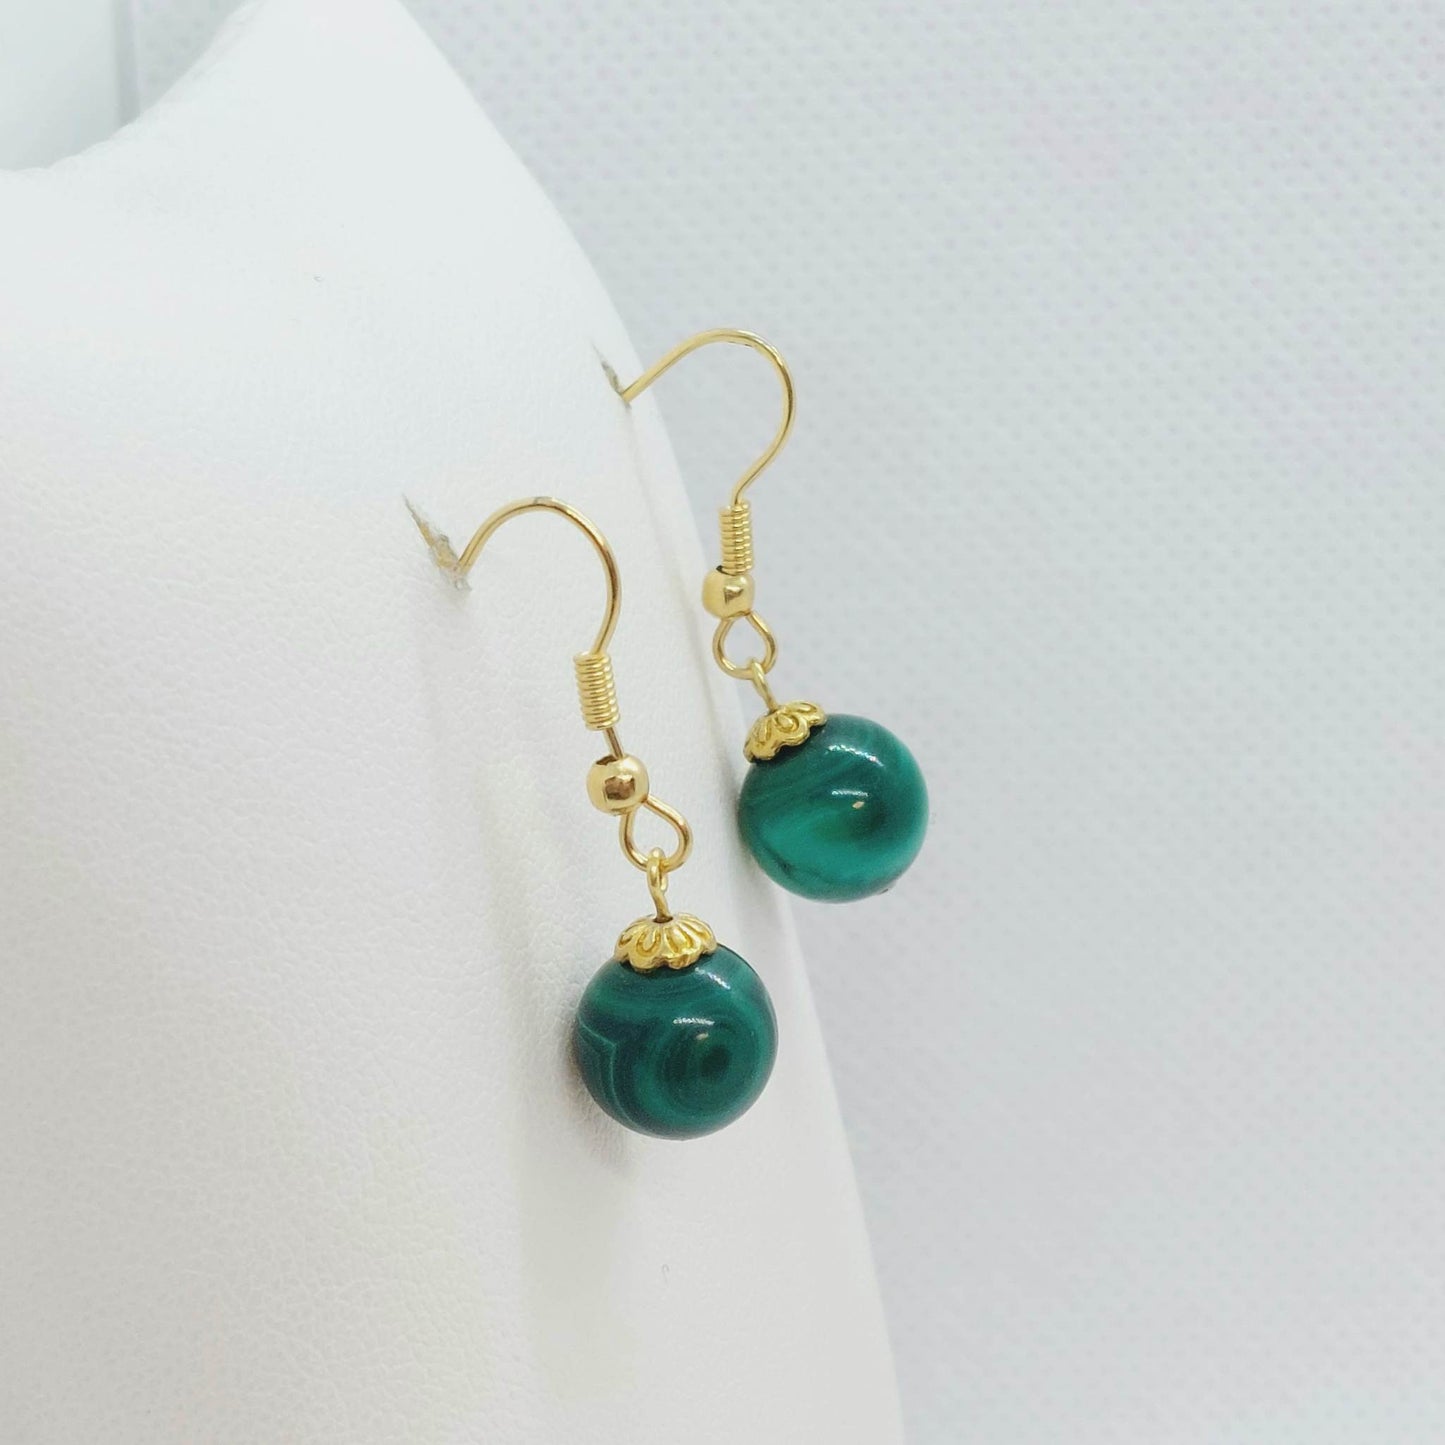 Natural Malachite Dangle Earrings with 10mm Stones in Stainless Steel